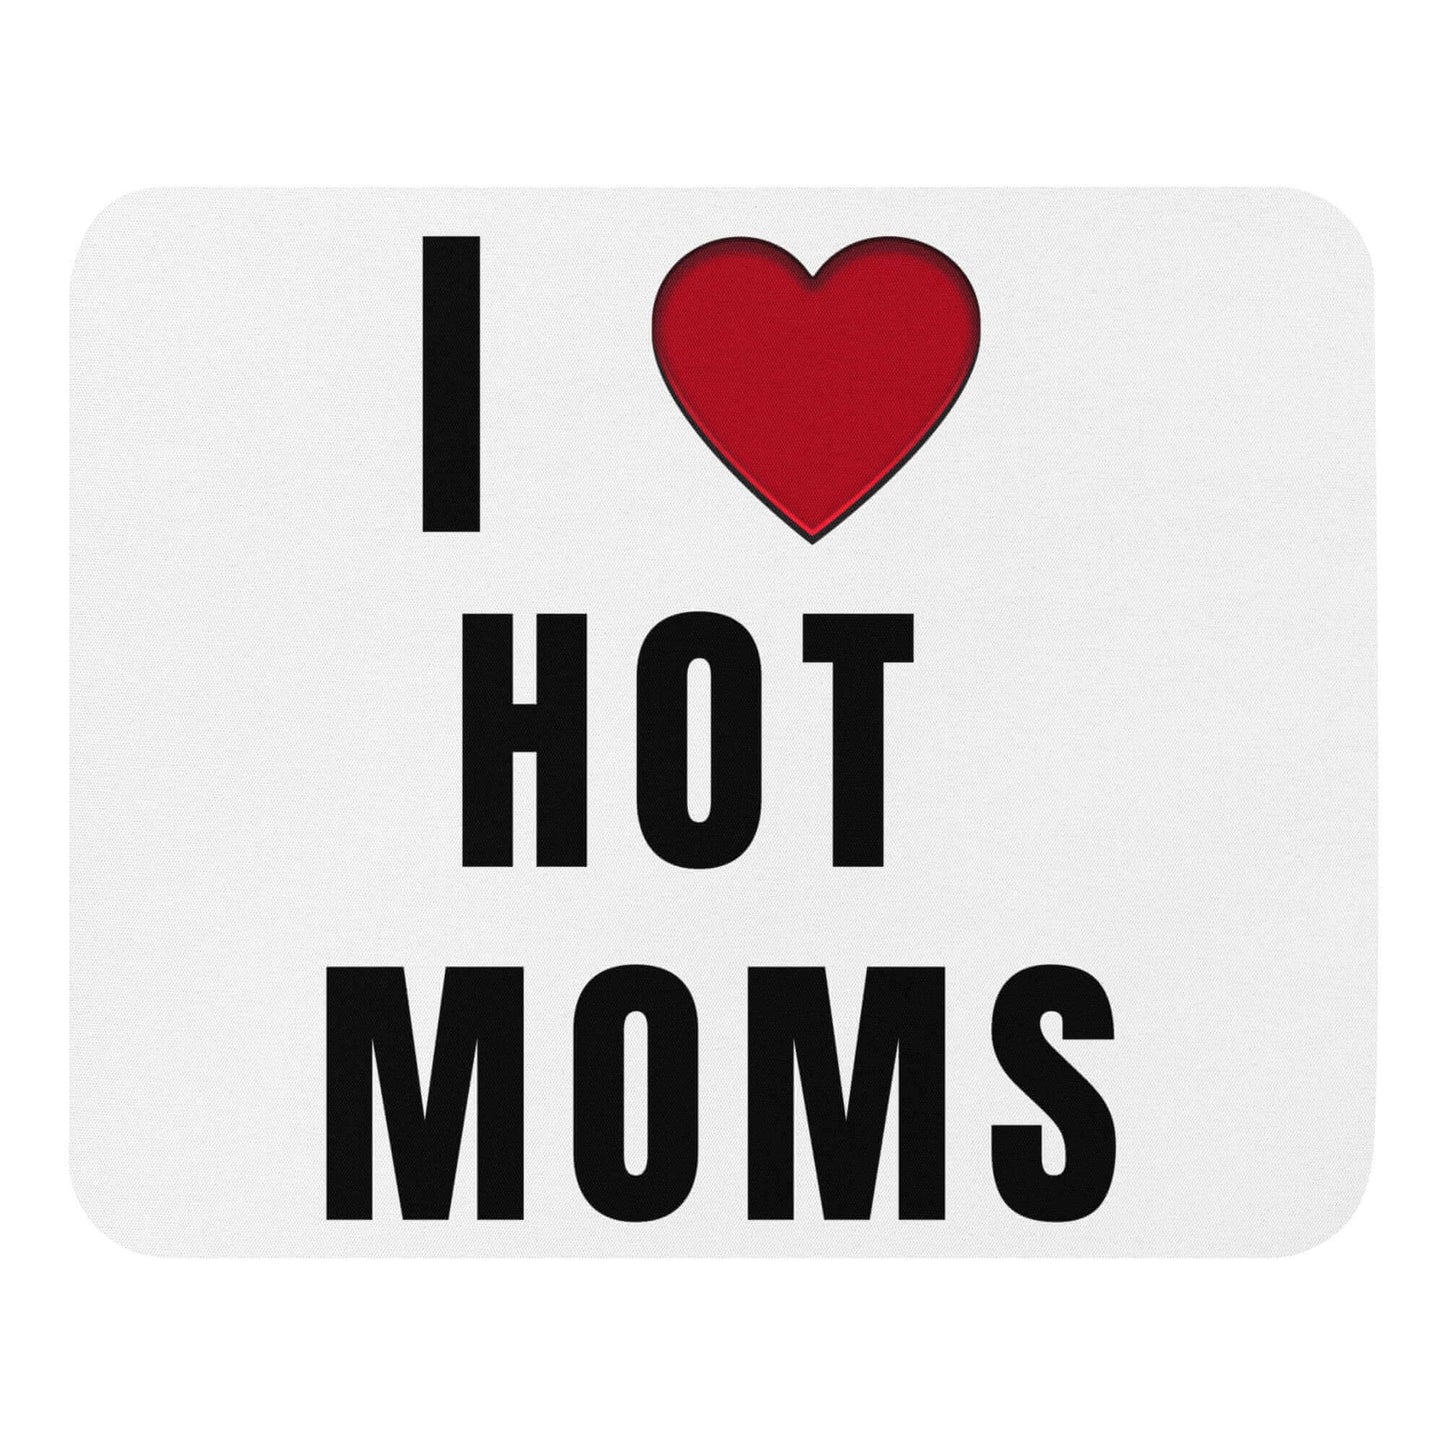 I love HOT Moms - Mouse pad - Horrible Designs